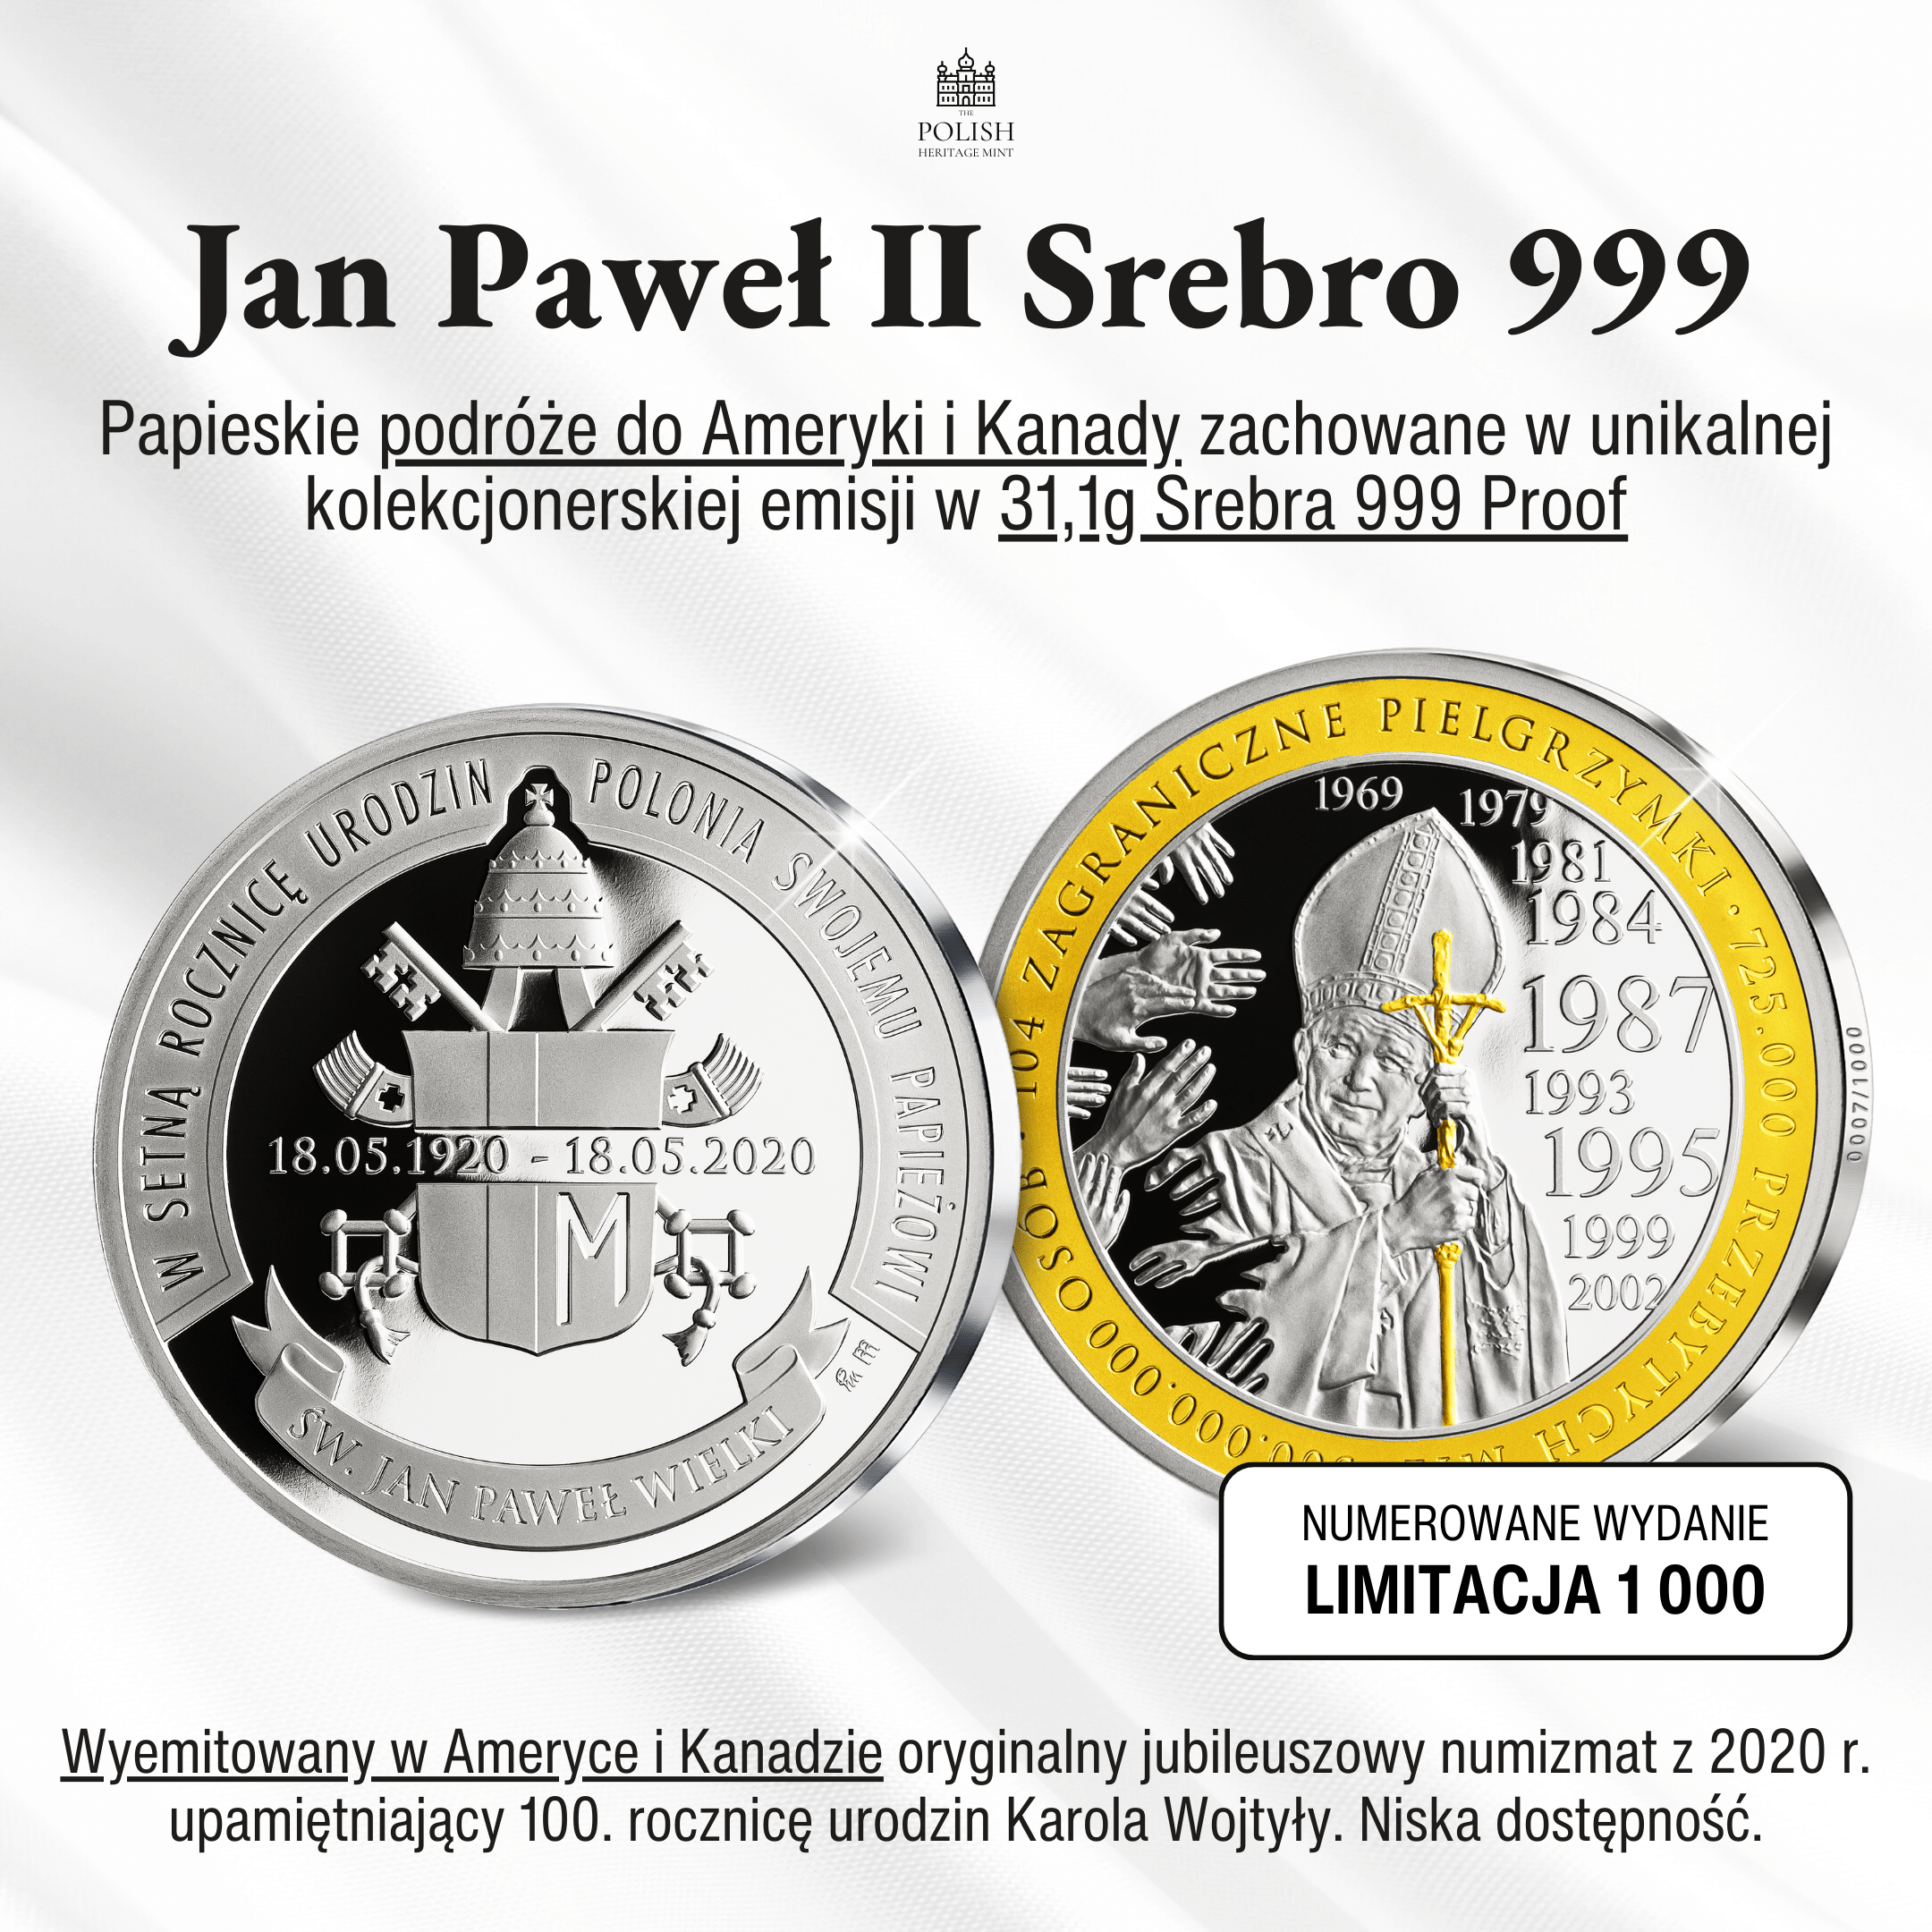 John Paul II • 100 Year Anniversary Commemorative • 1 Ounce .999 Silver Proof • 45 mm • 24-ct Gold Accents (Member-Only Offer P/I)